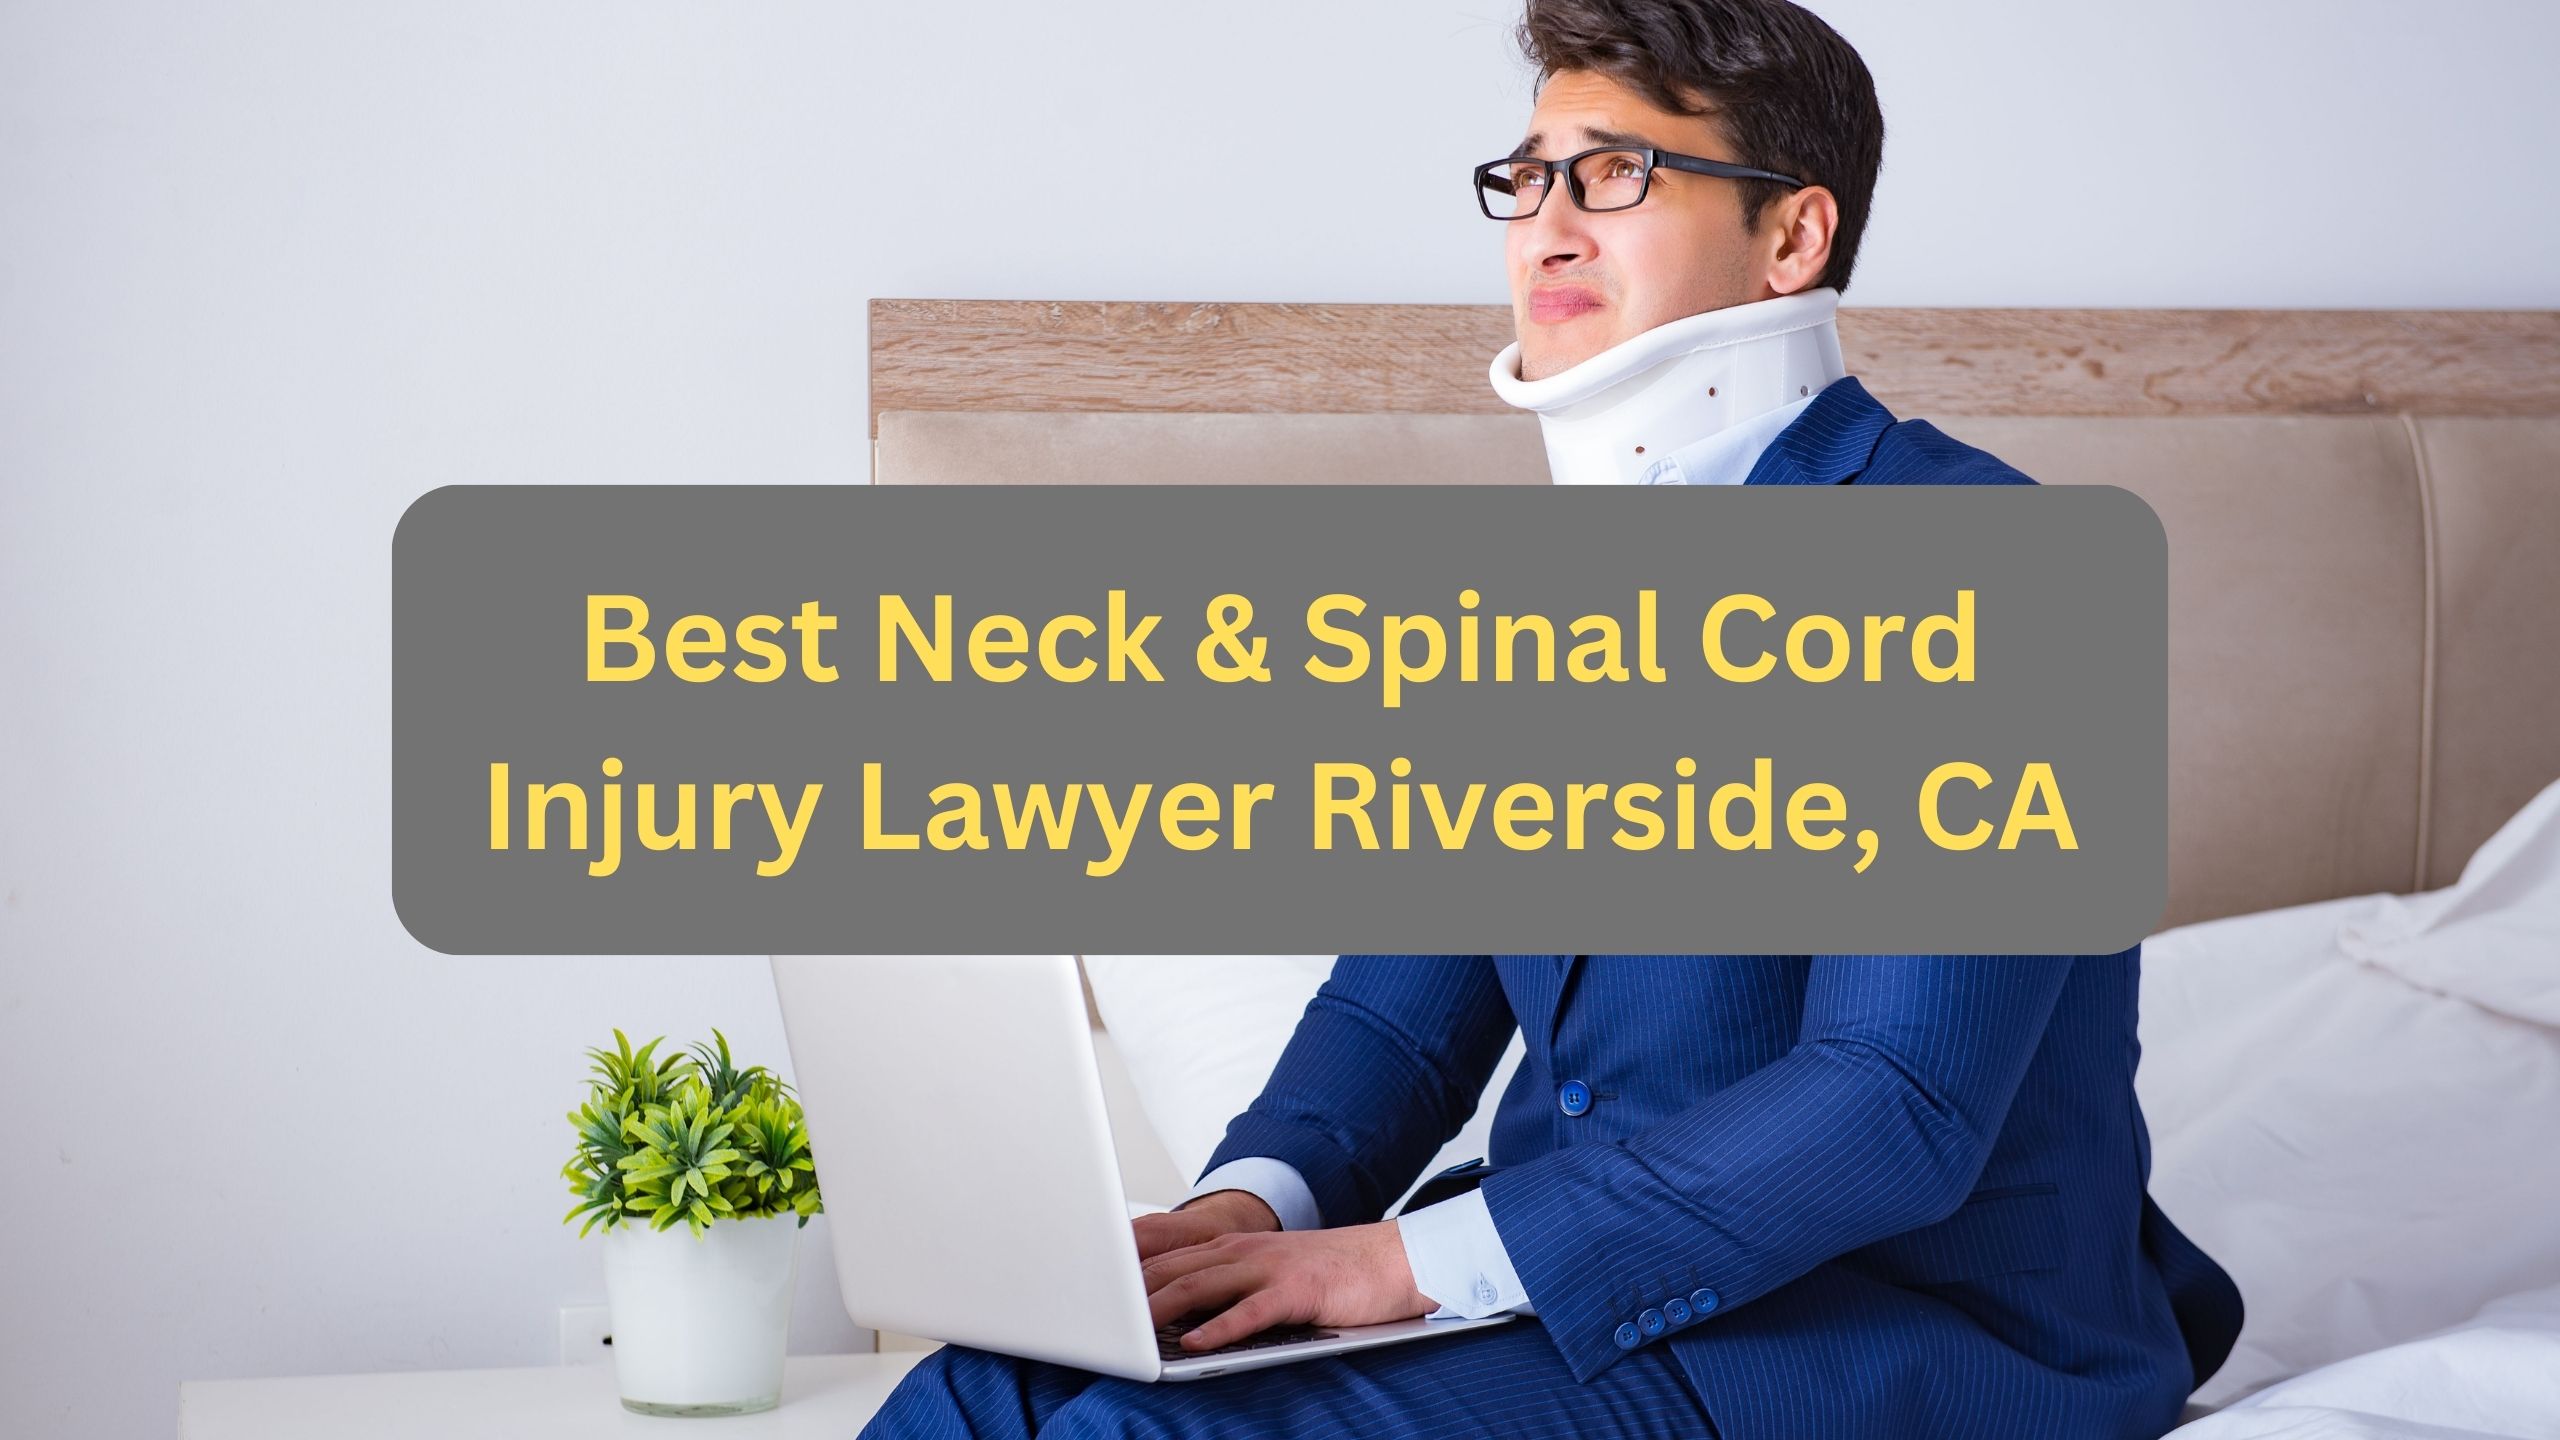 Best Neck & Spinal Cord Injury Lawyer